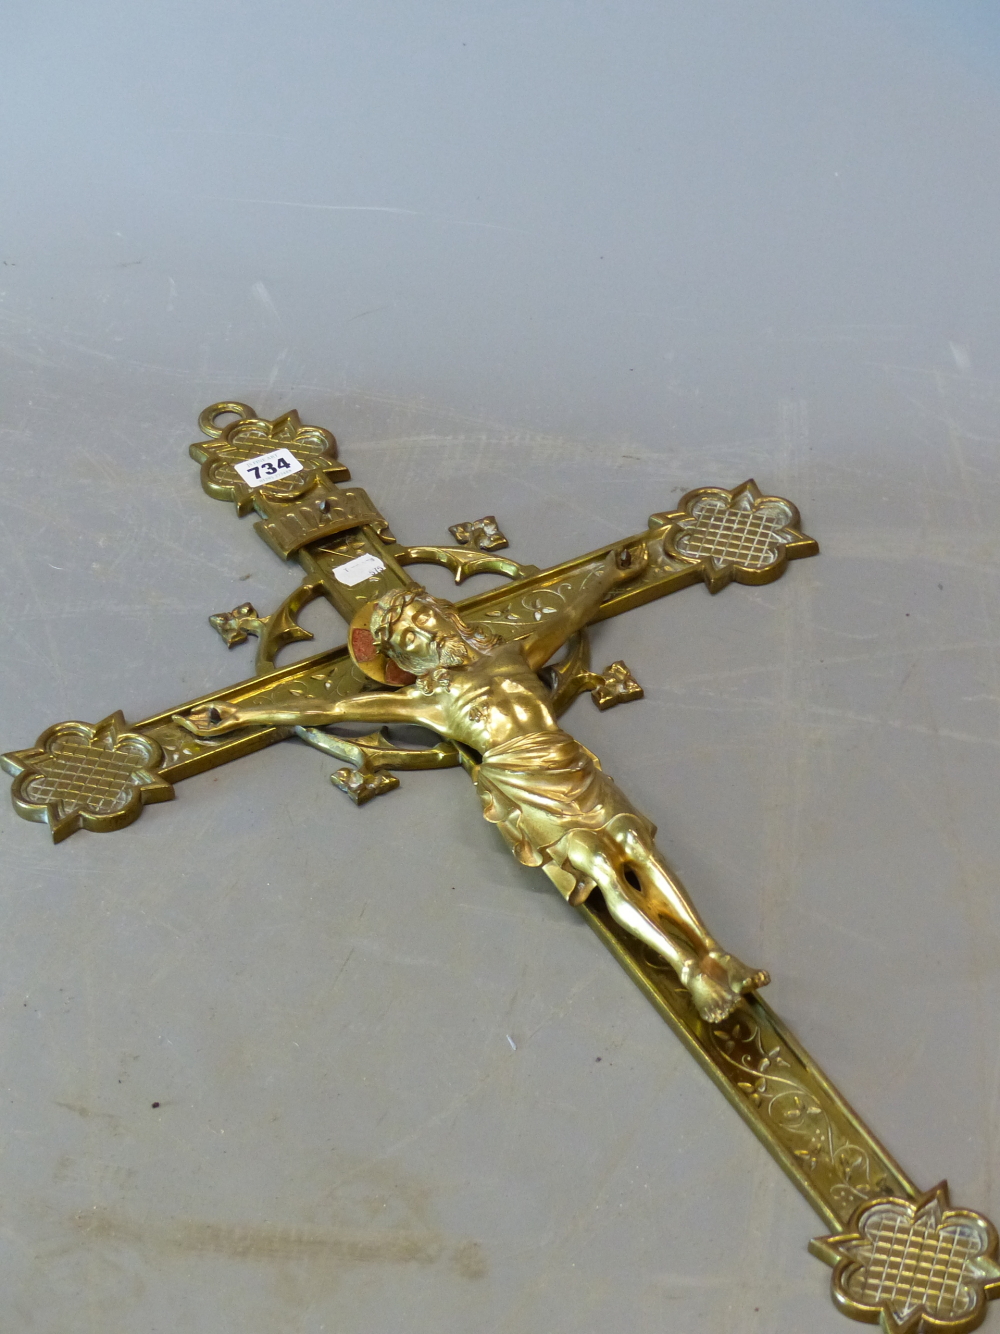 A LATE 19th C. GILT BRONZE CRUCIFIX, CHRISTS HALO PICKED OUT IN RED, THE END OF THE CROSS WITH